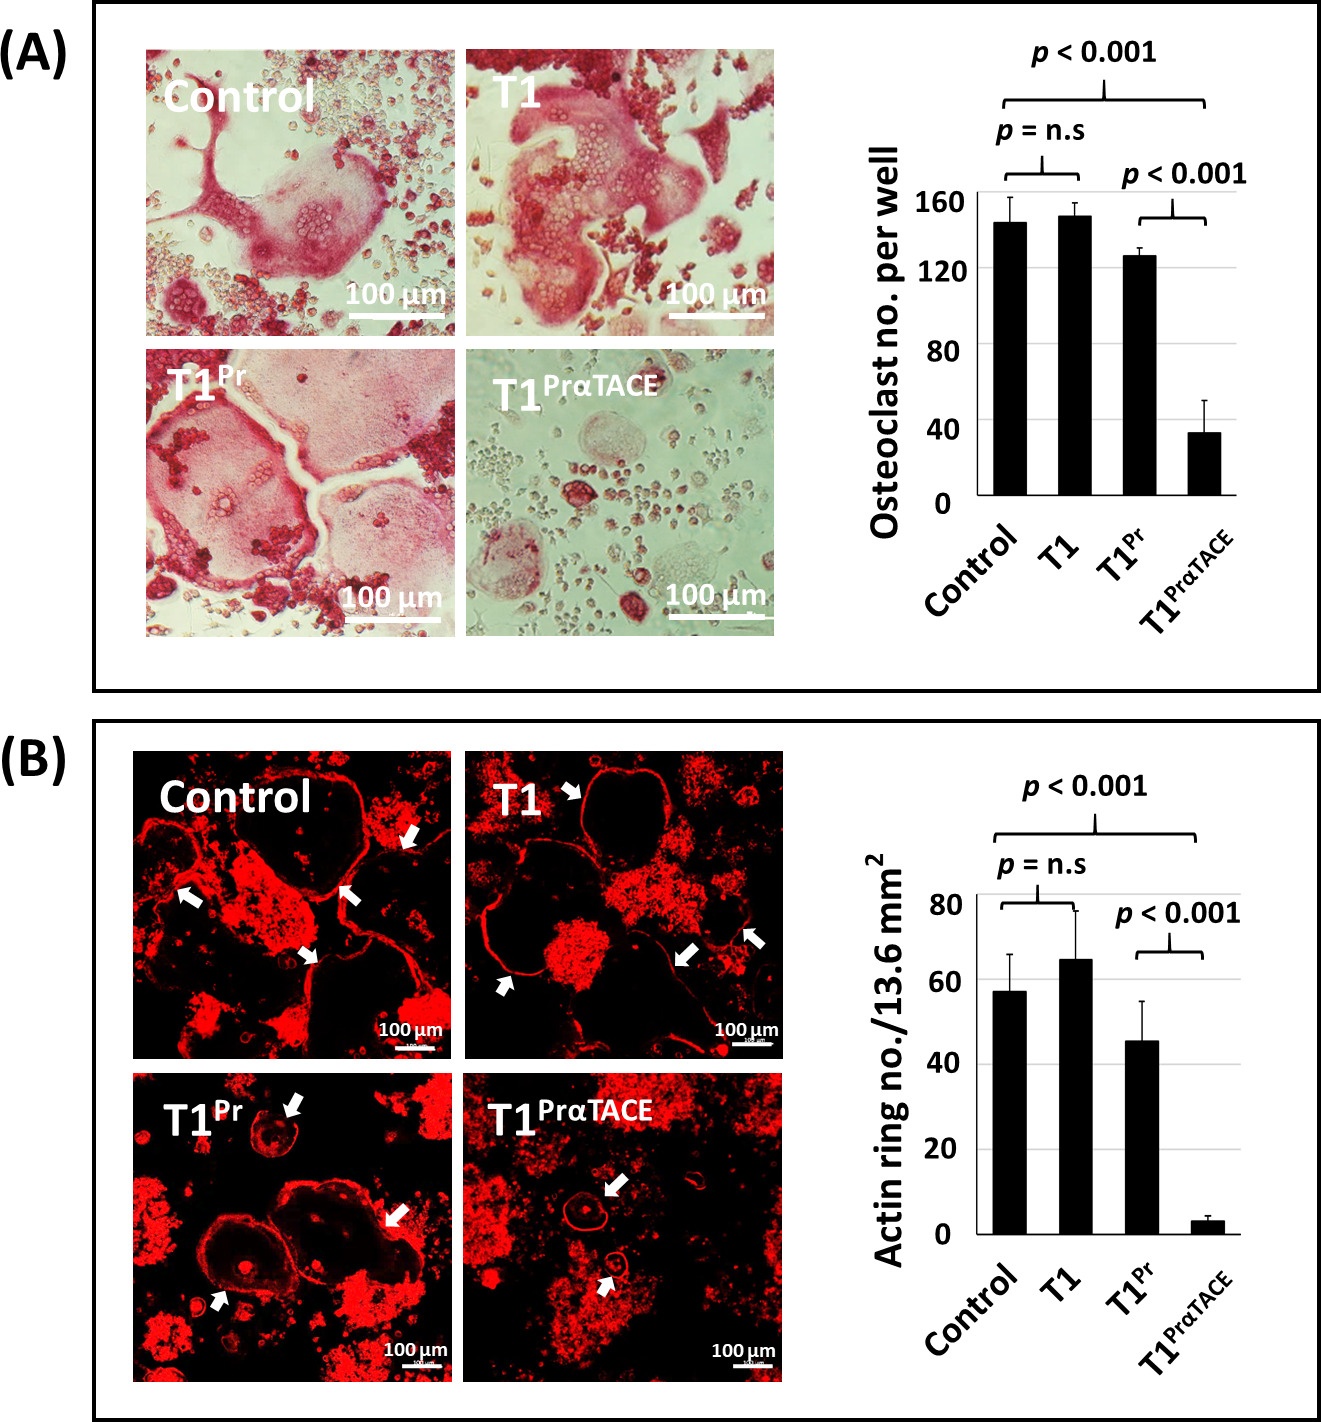 Fig. 2 
            T1PrαTACE abrogated receptor activator of nuclear factor kappa-Β ligand (RANKL)-mediated osteoclast differentiation. a) RAW264.7 cells transduced with T1PrαTACE were not able to transform into osteoclasts in response to RANKL induction. Left: tartrate-resistant acid phosphatase (TRAP)-stained multinucleated osteoclasts 120 hours after induction with RANKL. Right: A significantly lower number of osteoclasts was observed in RAW264.7 cells transduced with T1PrαTACE. b) Phalloidin-stained F-actin rings characteristic of bone-resorbing osteoclasts. In marked contrast to the larger and more irregularly-shaped F-actin rings in the wild-type T1 and T1Pr groups, far fewer F-actin rings were detected in T1PrαTACE cells. Osteoclasts are highlighted by arrows. Statistical significance was determined by analysis of variance. n. s., not significant.
          